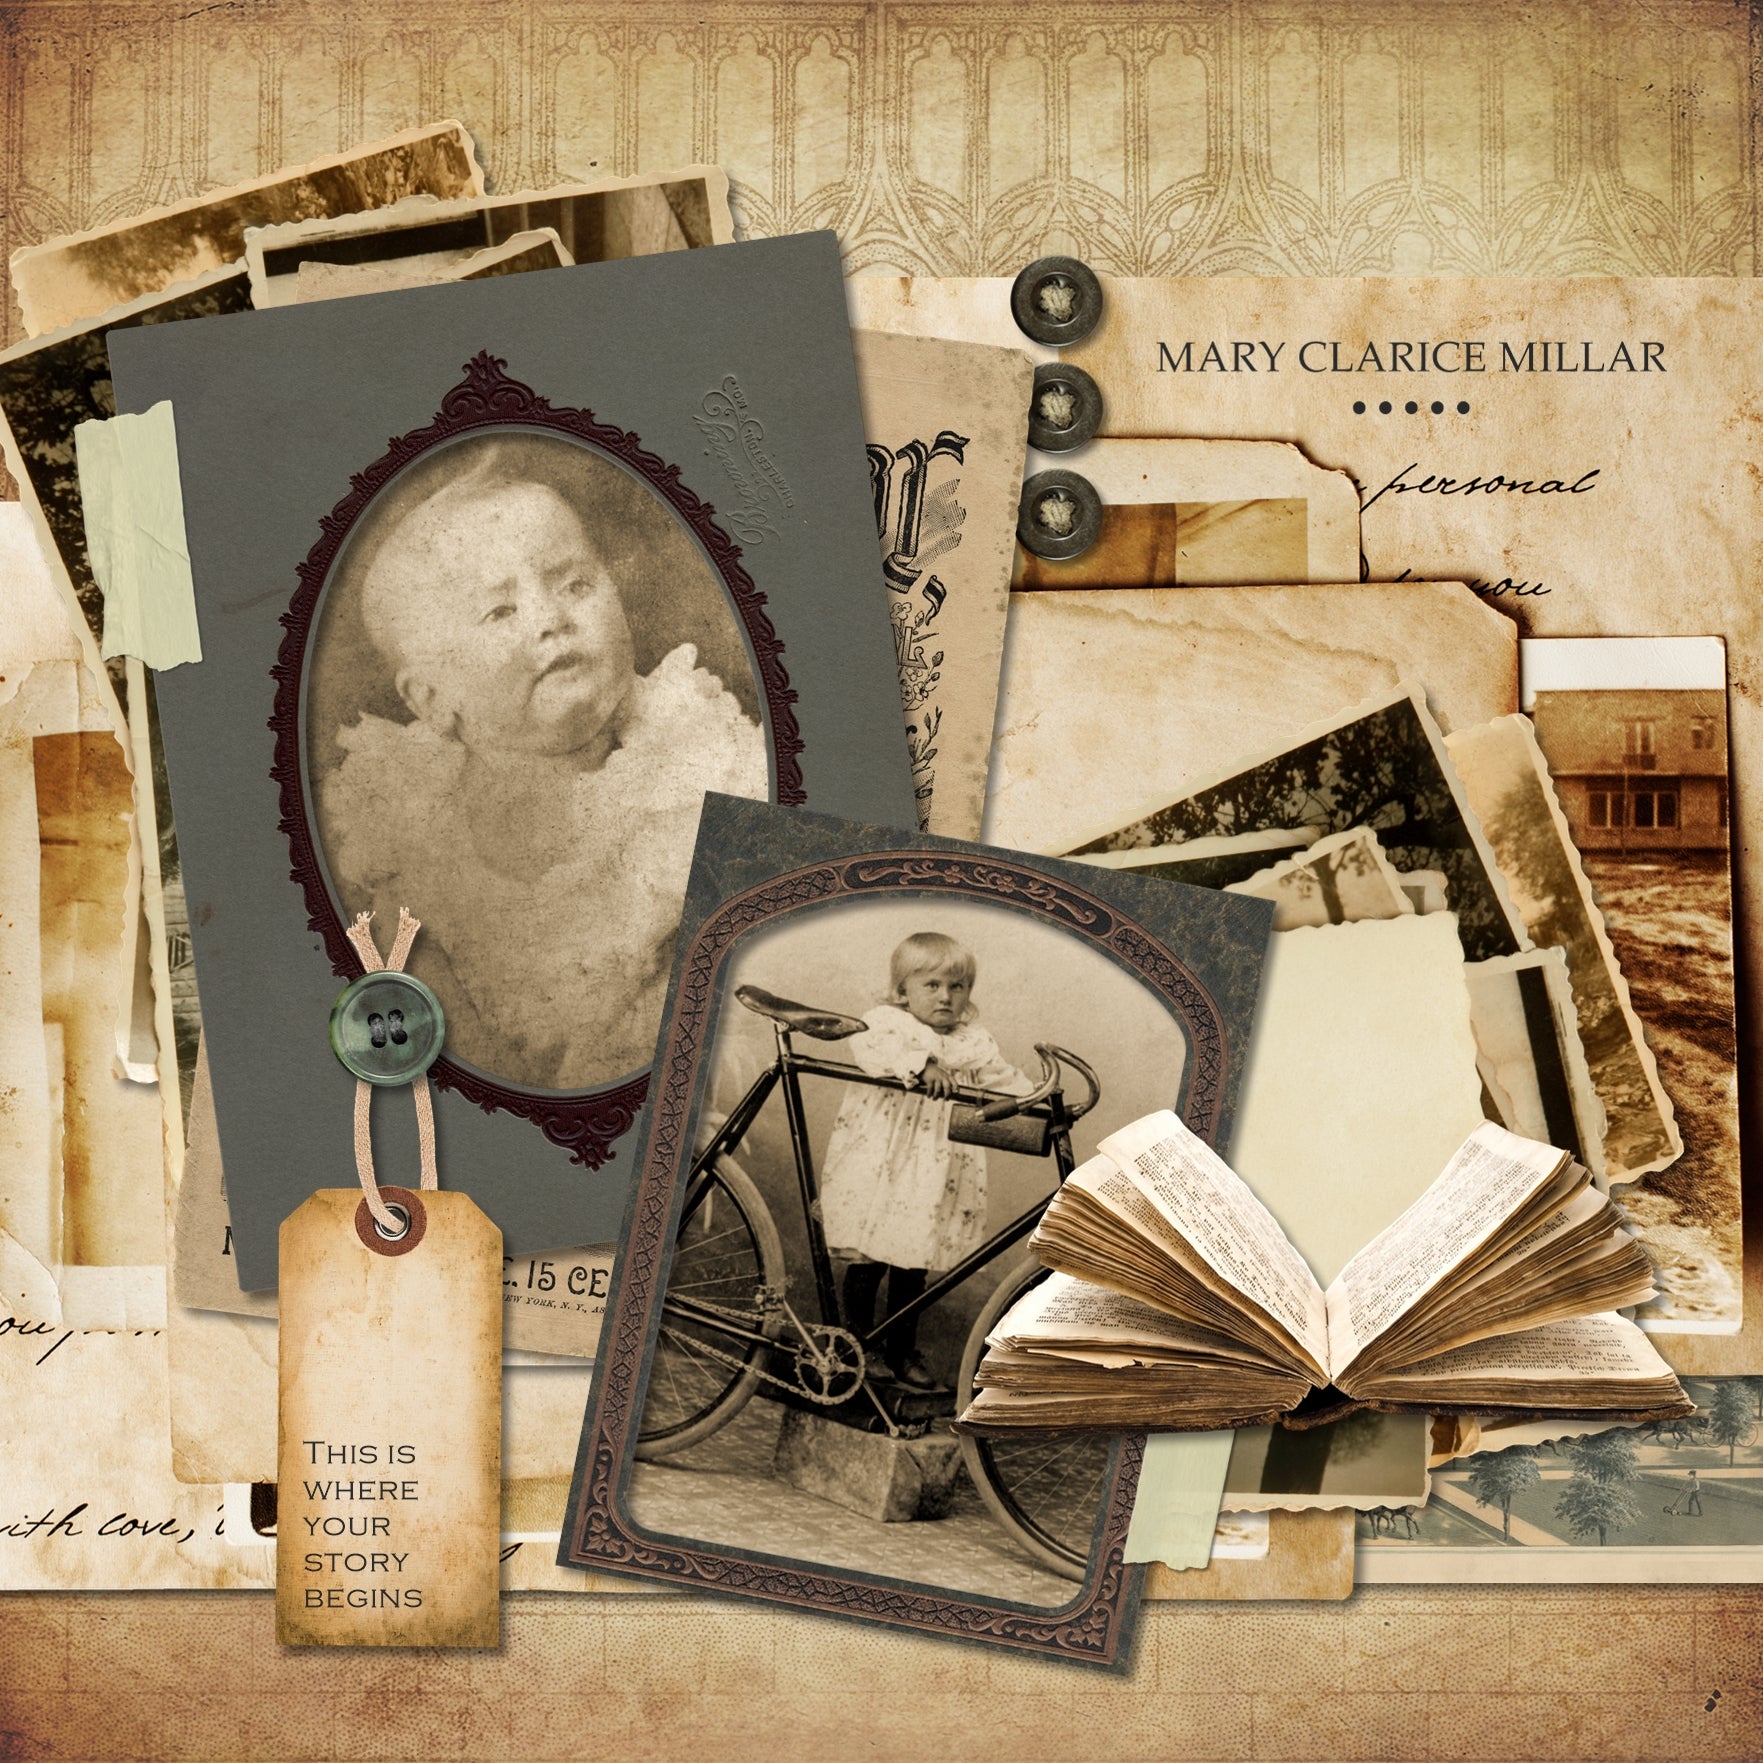 As a welcome addition to our vintage digital art collections, Basic Vintage Digital Scrapbook Kit by Lucky Girl Creative contains over 60 vintage elements, including frames, labels, and papers. It contains everything you’ll need to get you started on your family history and genealogy scrapbook projects as it captures the times of the 1920’s - 1940’s and is neutral in its color palette while it still offers a wide variety of antique embellishments to choose from.